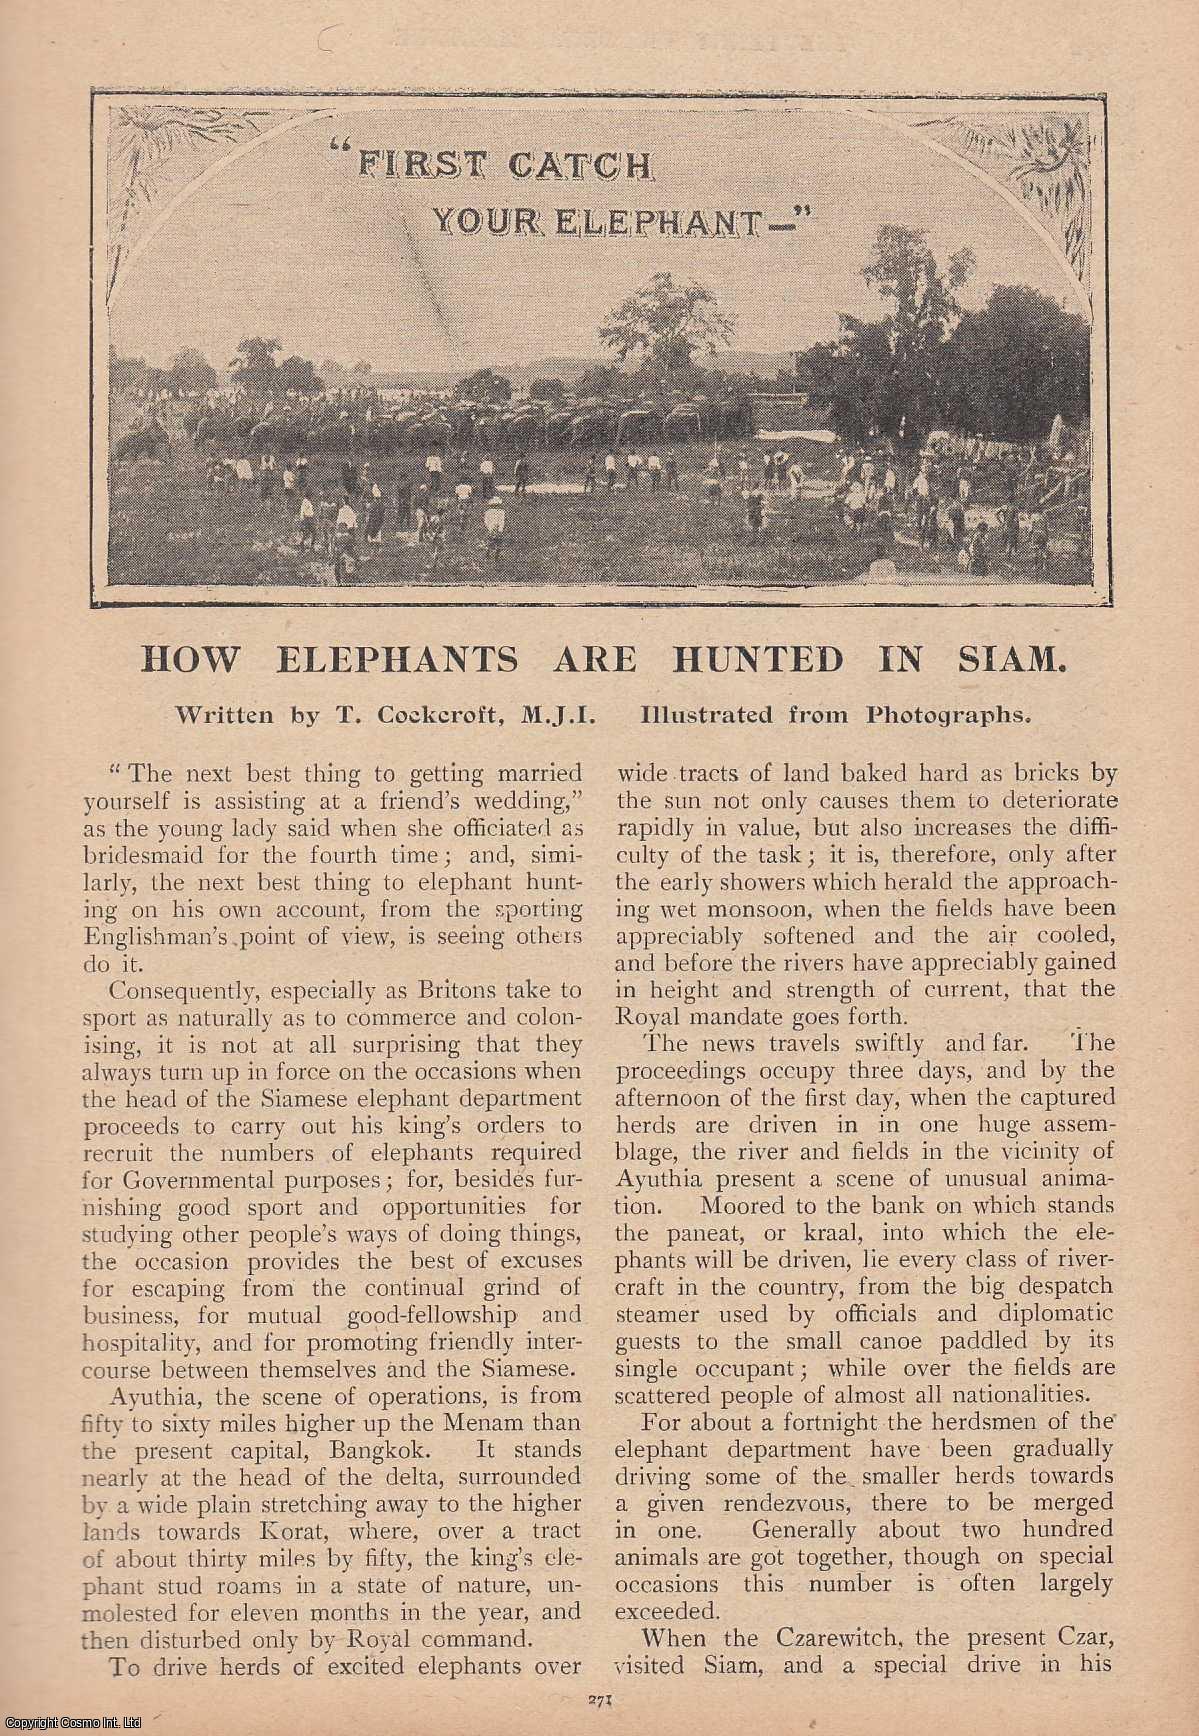 T. Cockcroft - How Elephants are Hunted in Siam. Illustrated from photographs. This is an original article from the Penny Pictorial Magazine, 1899.